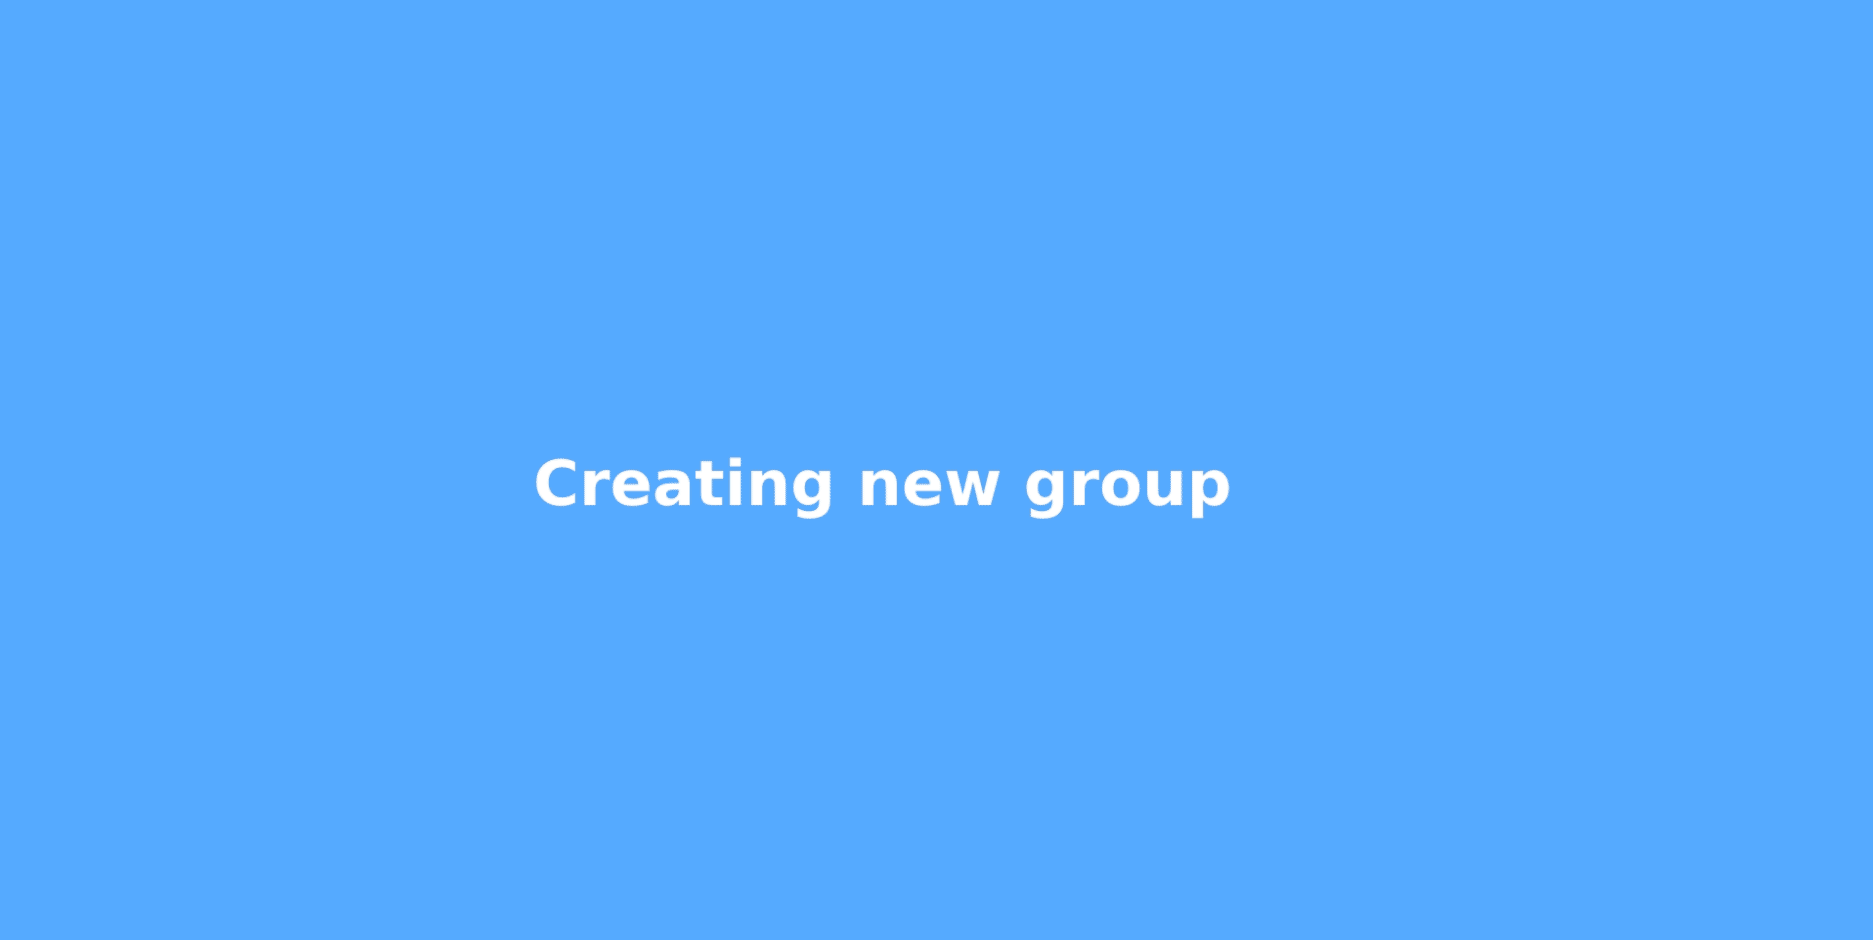 animation showing how to create a group